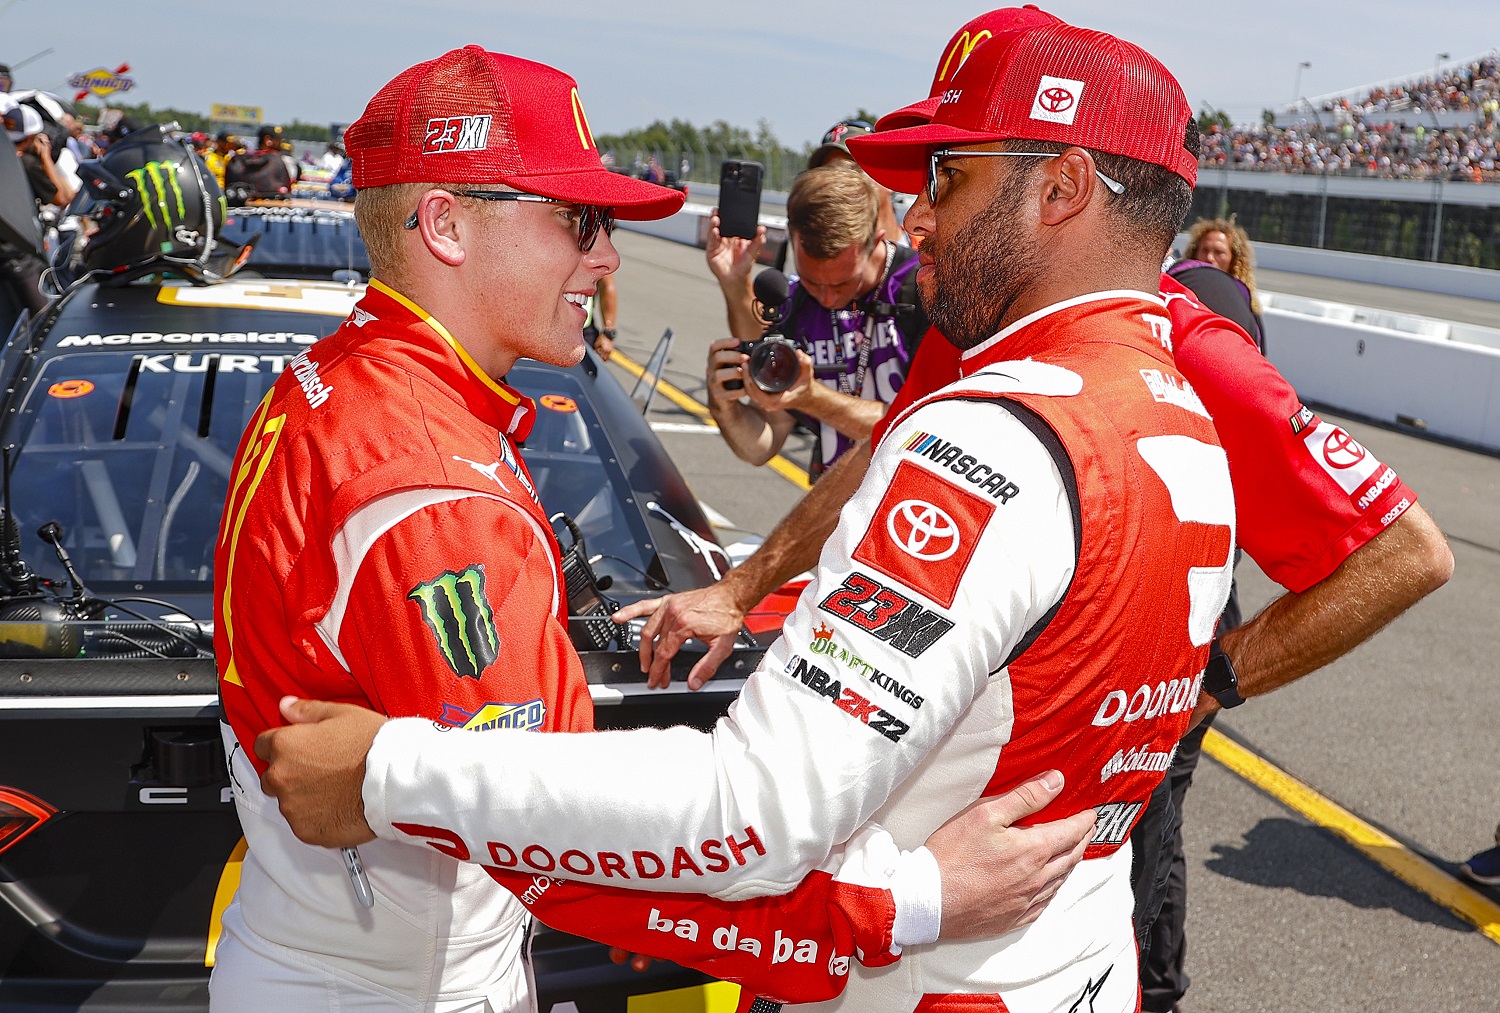 Ty Gibbs and Bubba Wallace talk on the grid prior to the NASCAR Cup Series M&M's Fan Appreciation 400 at Pocono Raceway on July 24, 2022. | Tim Nwachukwu/Getty Images